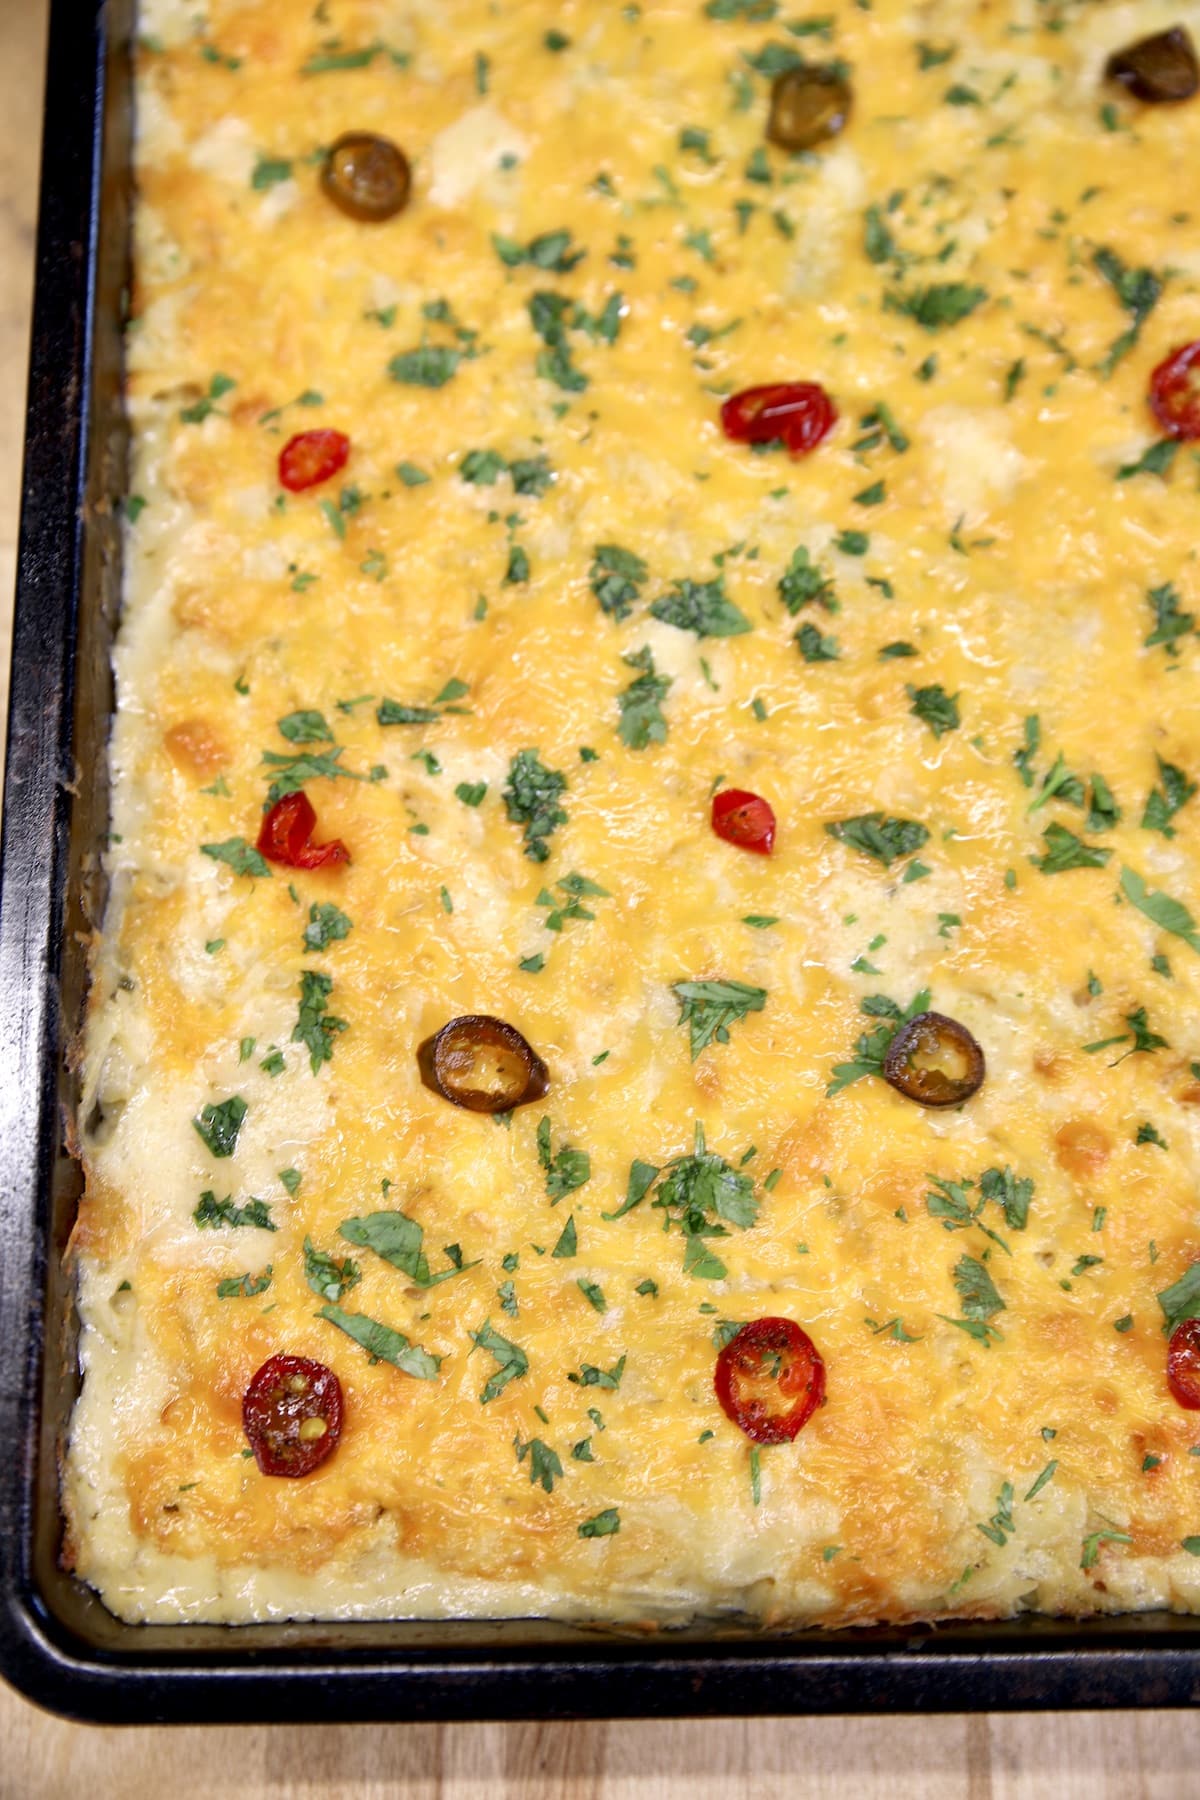 Jalapeno Hashbrown Casserole in a pan.